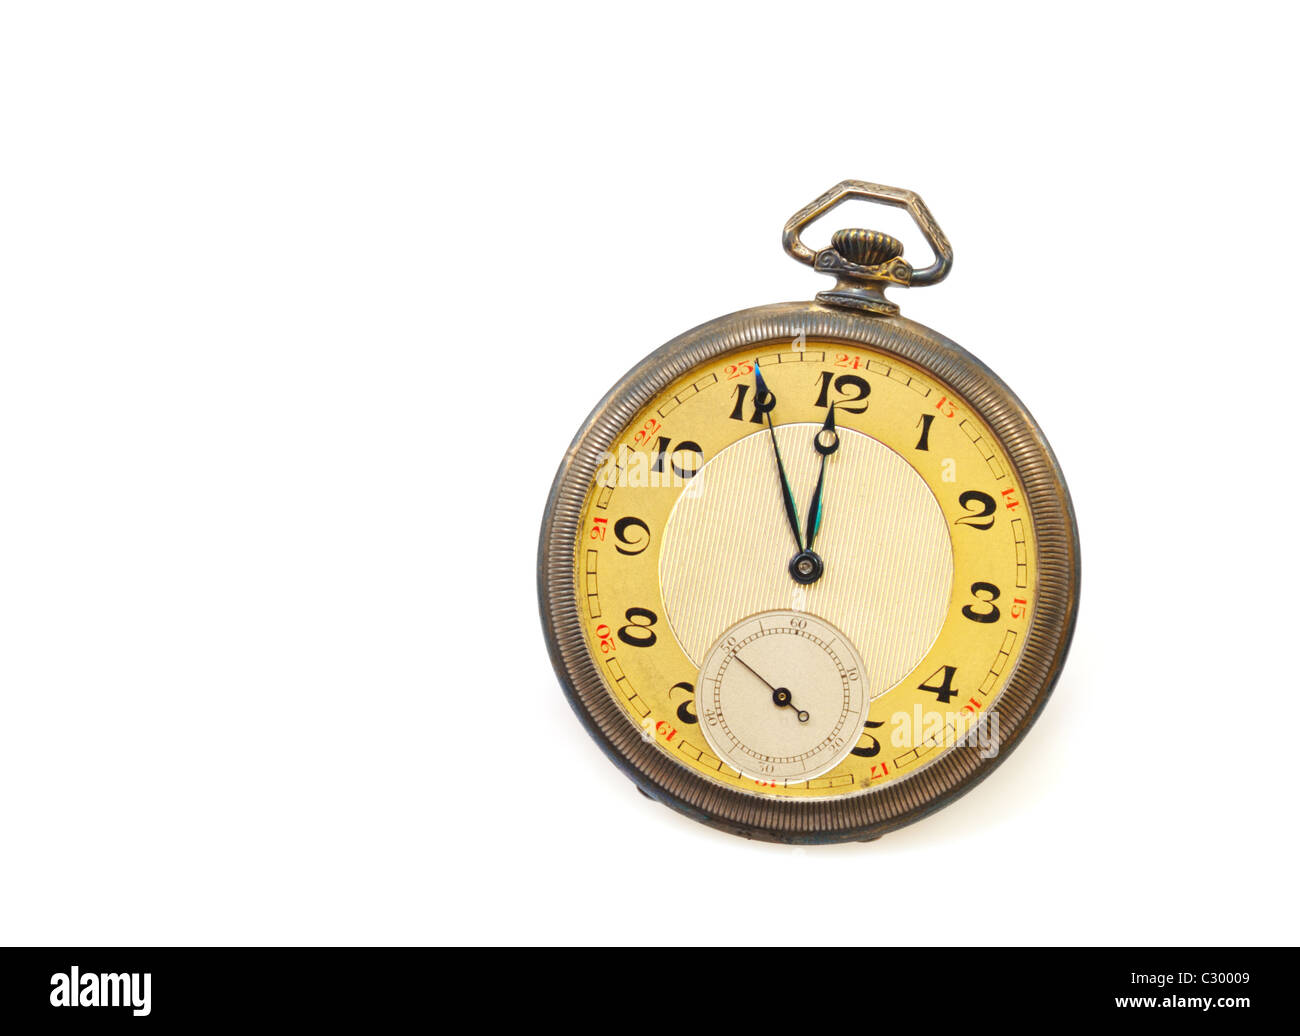 Old antique pocket watch isolated on white background Stock Photo